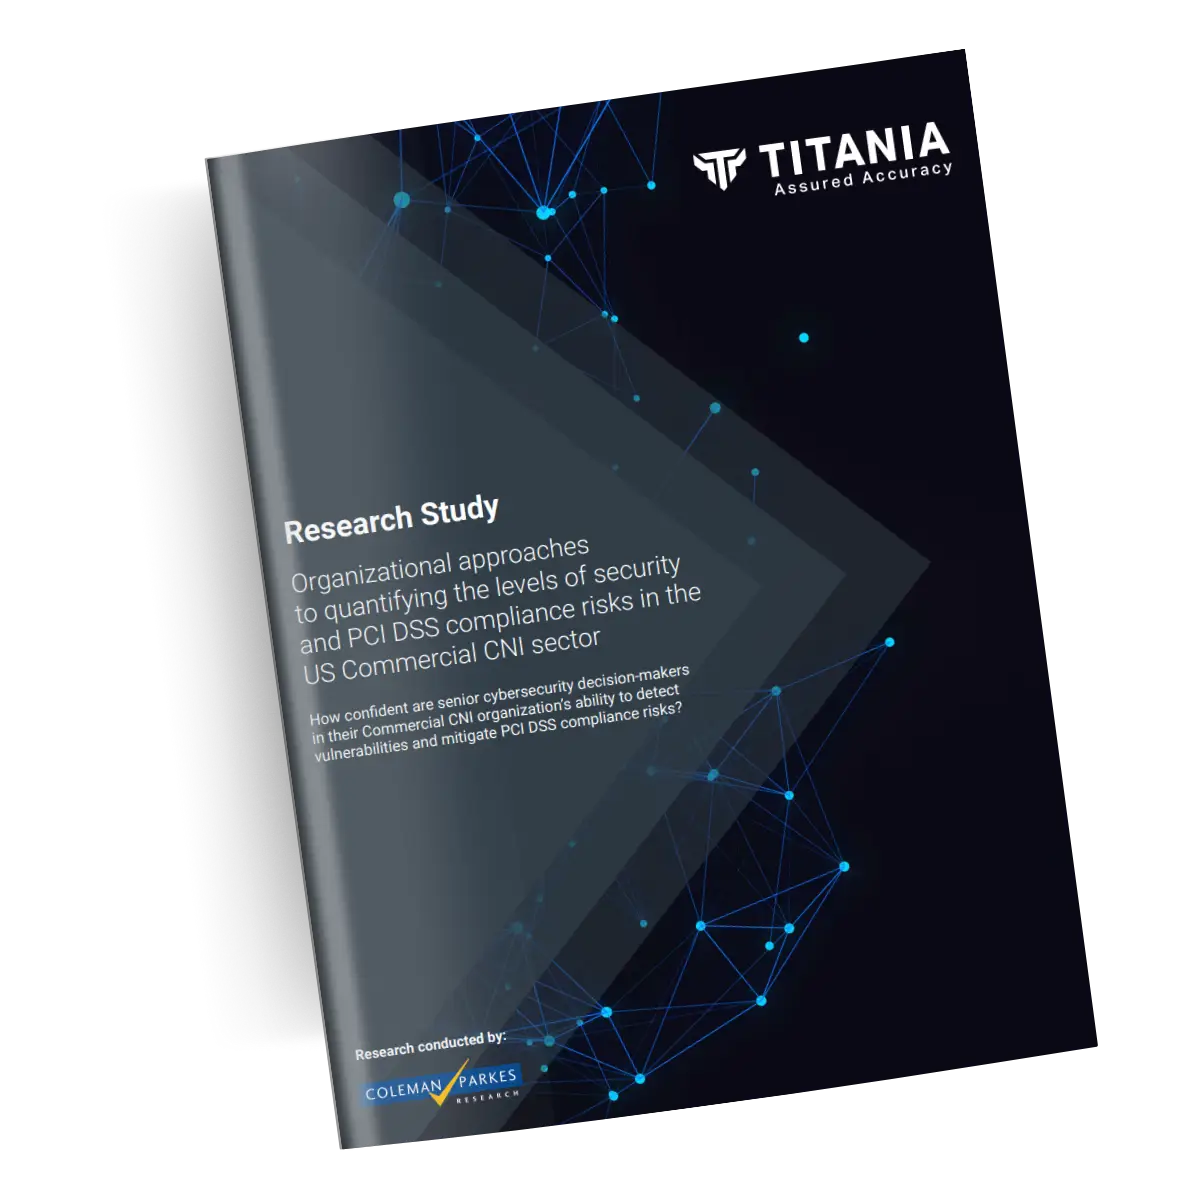 Titania Research Report cover titled 'Organizational approaches to quantifying the levels of security and PCI DSS compliance'